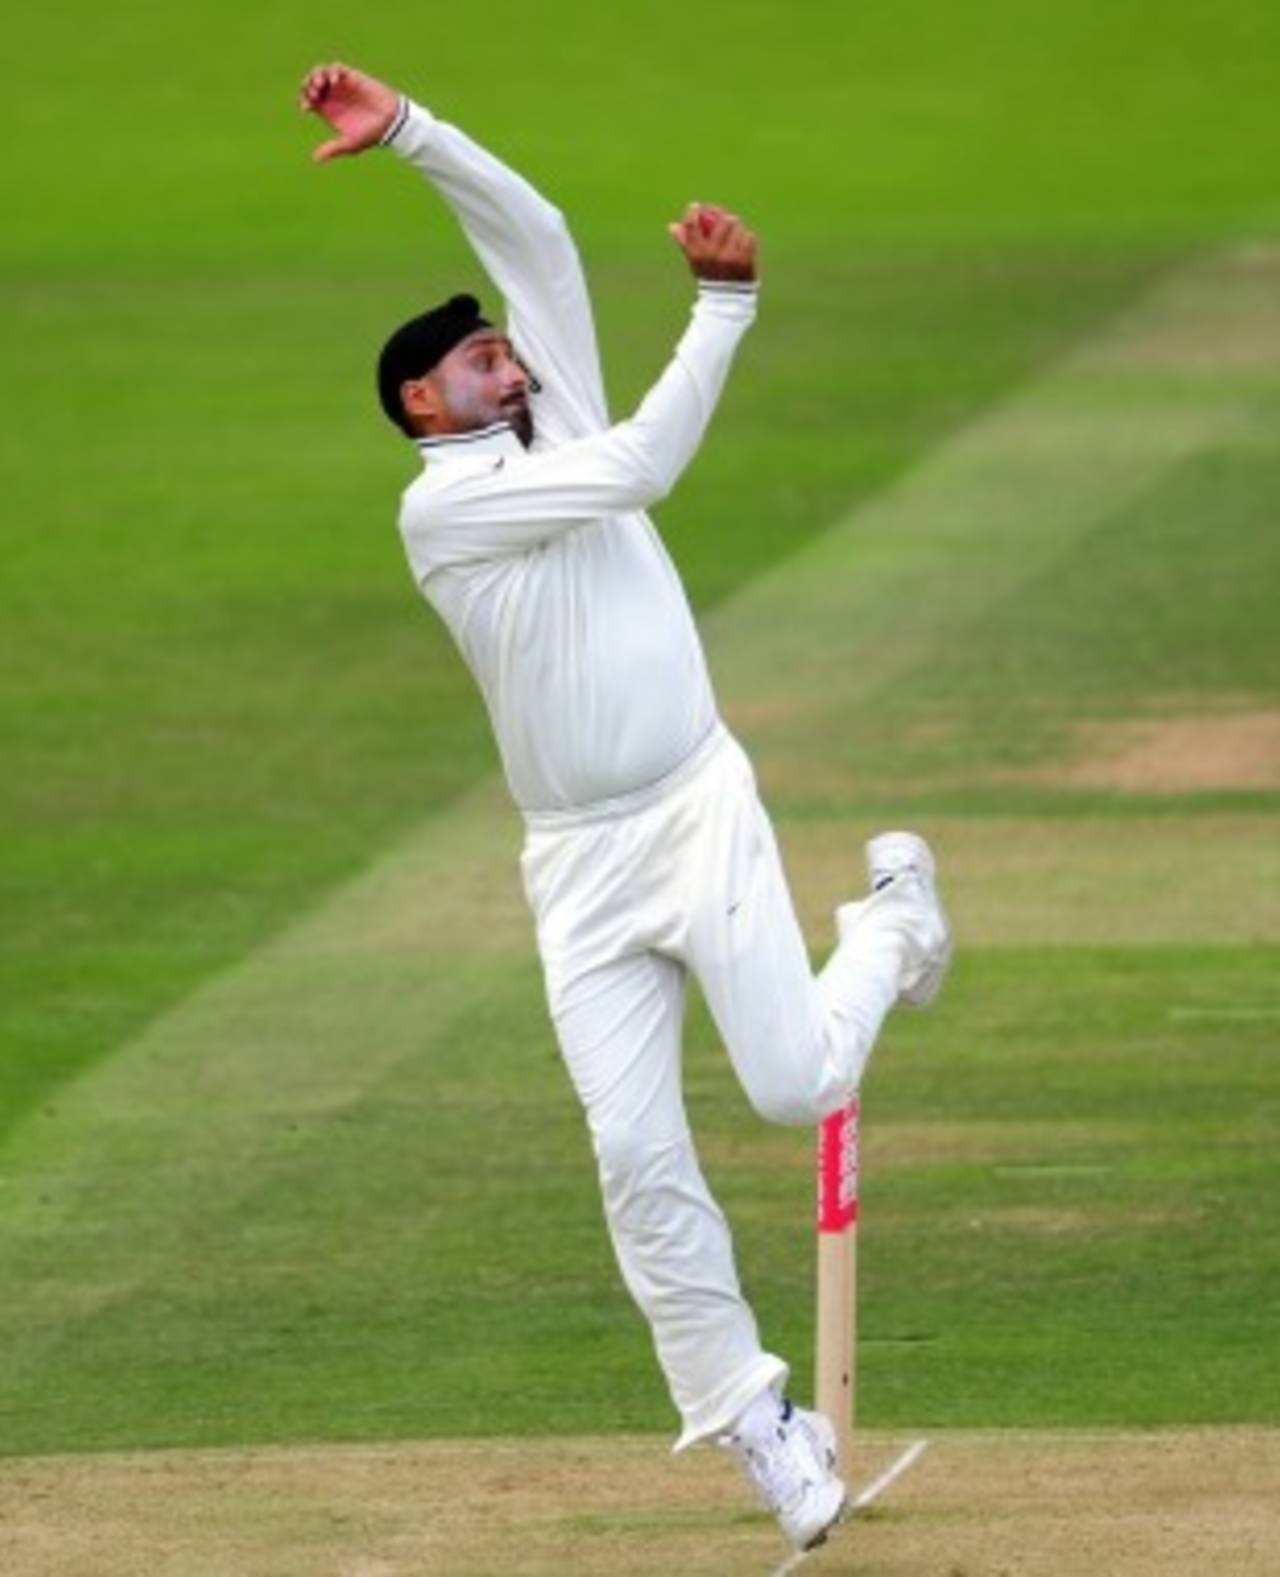 Harbhajan Singh struggled for wickets, England v India, 1st Test, Lord's, 2nd day, July 22, 2011